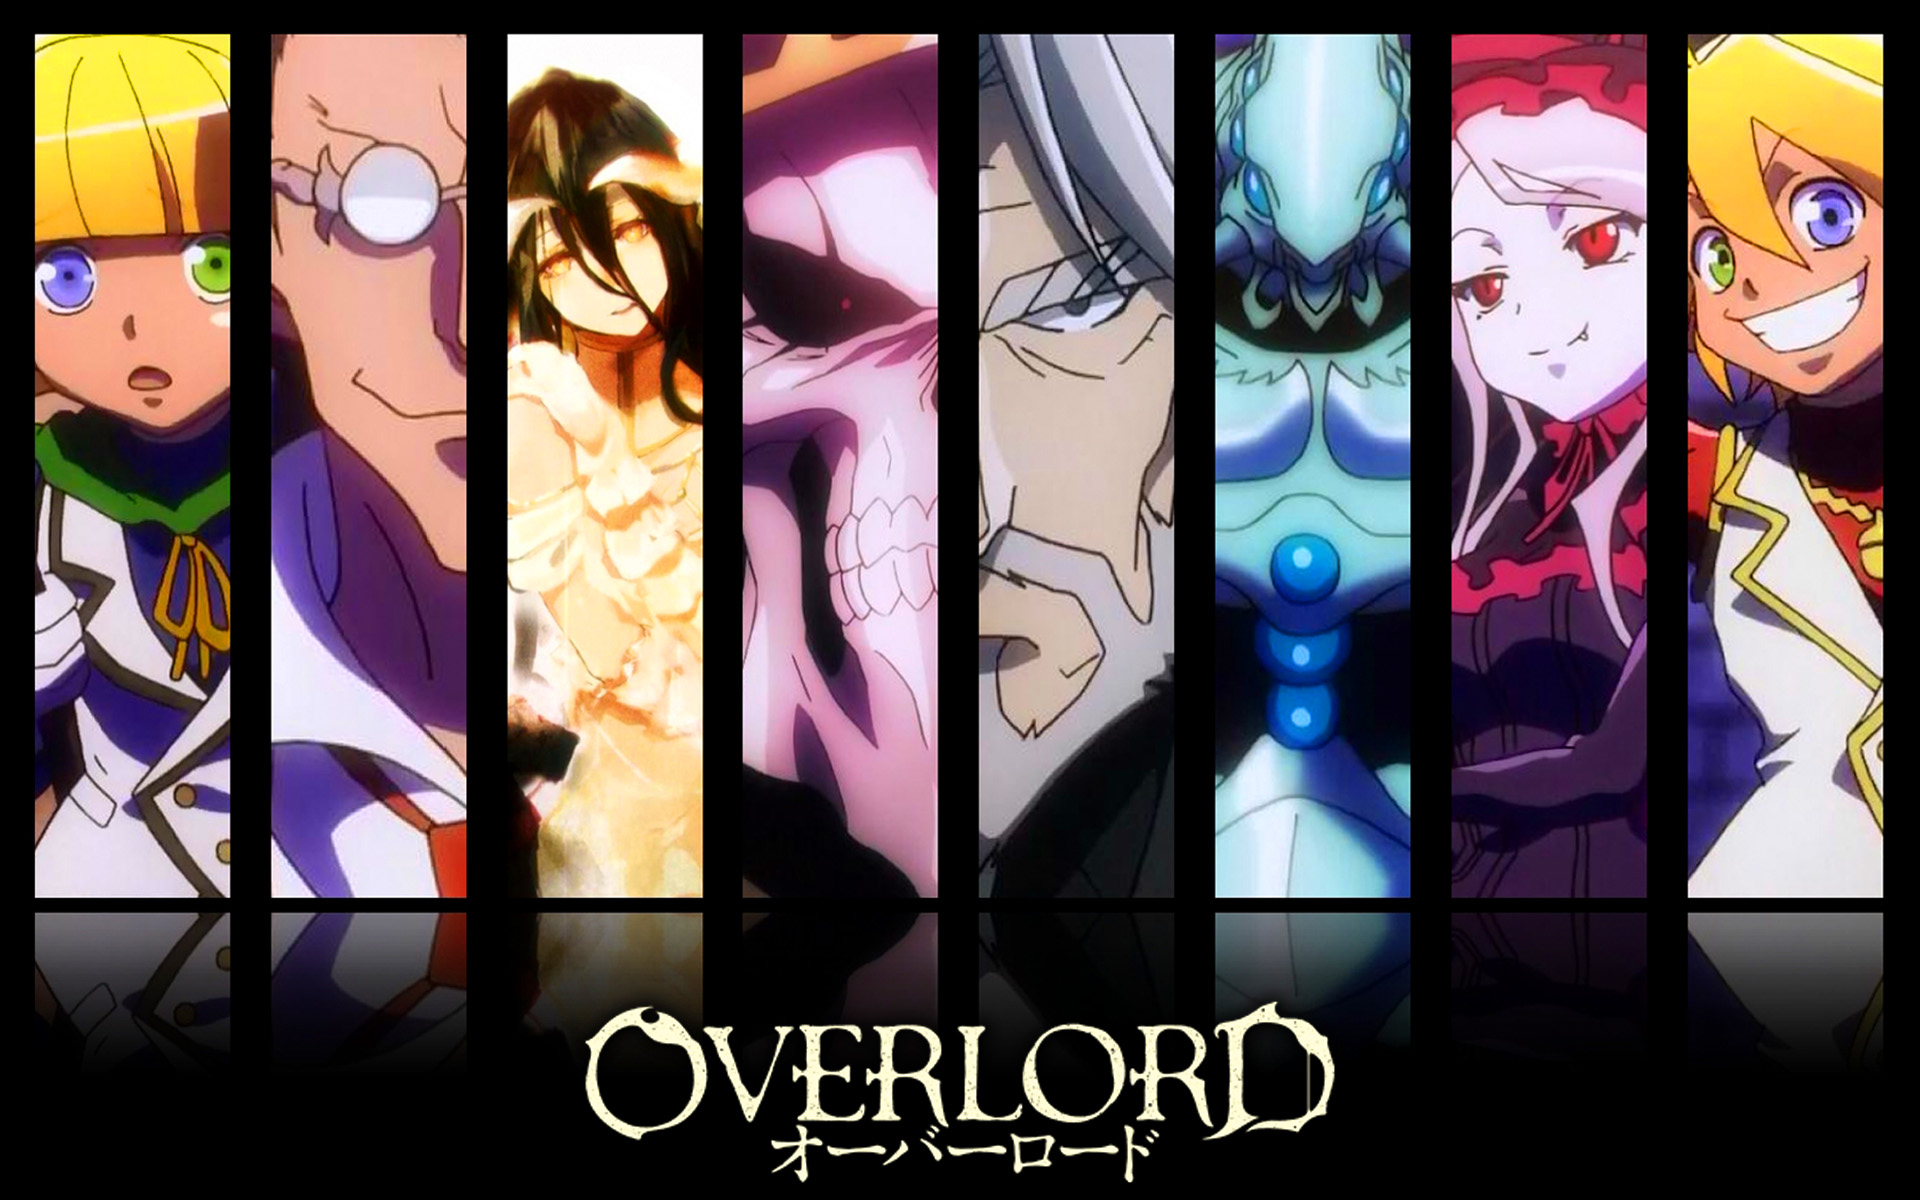 Free Download Anime Overlord Overlord Mare Bello Fiore Aura Bella Fiora Shalltear 19x10 For Your Desktop Mobile Tablet Explore 49 Overlord Anime Albedo Wallpaper Overlord Anime Albedo Wallpaper Overlord